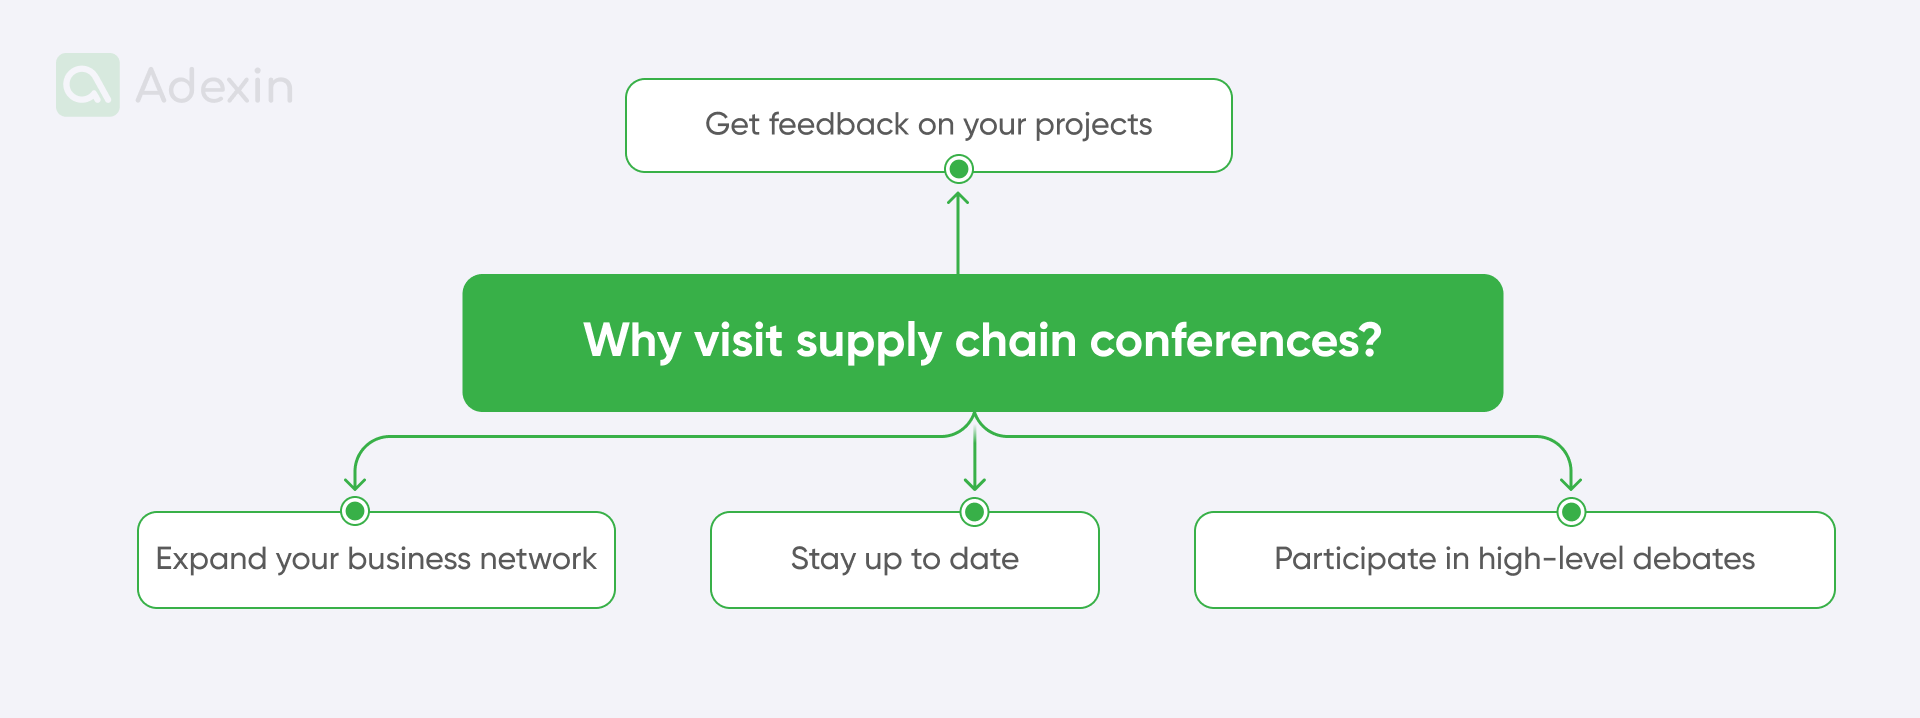 Benefits of visit supply chain conferences